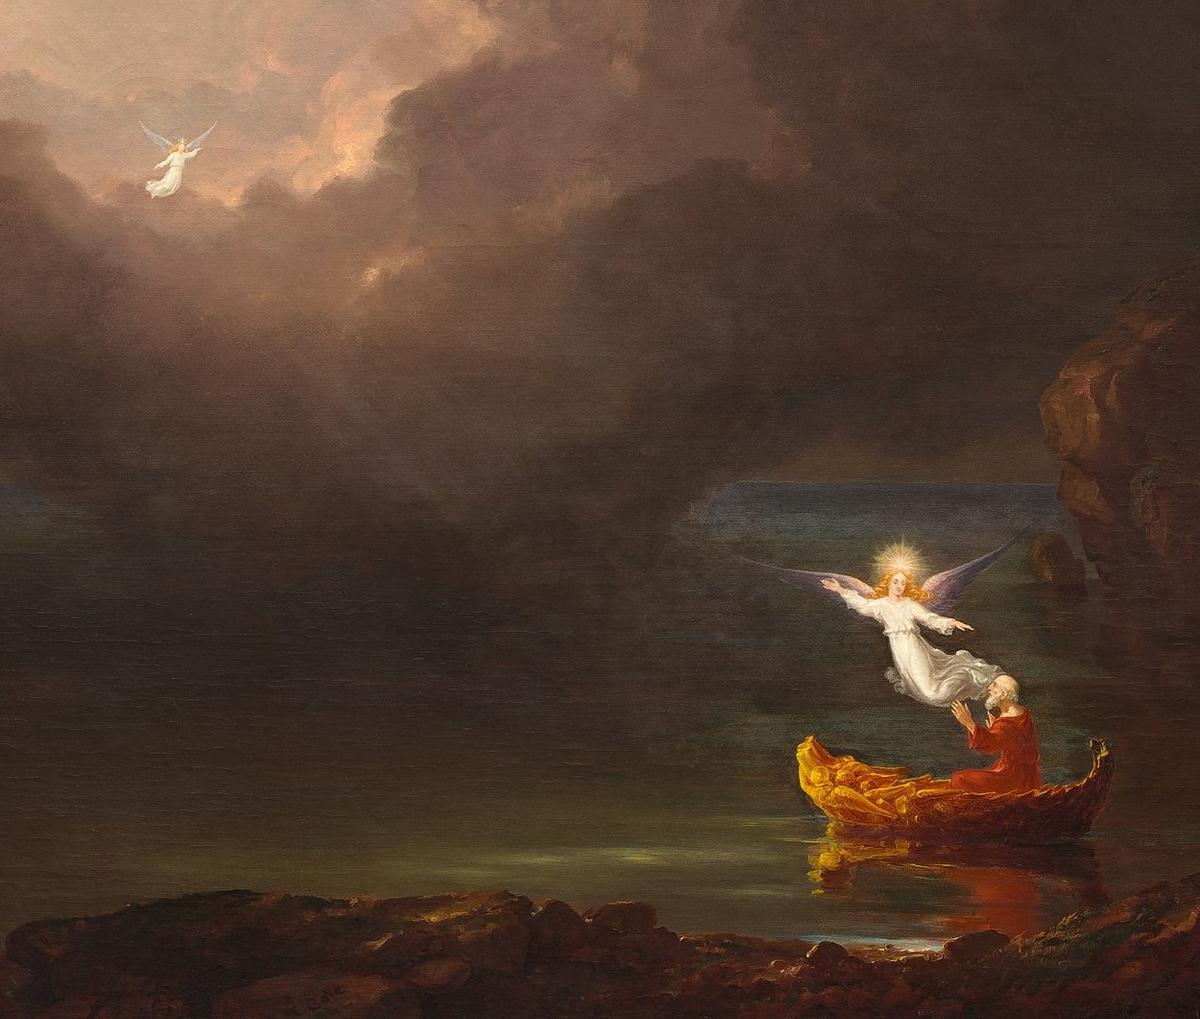 “The Voyage of Life: Old Age,” 1842, by Thomas Cole. Oil on canvas; 52.8 inches by 76.8 inches. National Gallery of Art, Washington D.C. (Public Domain)